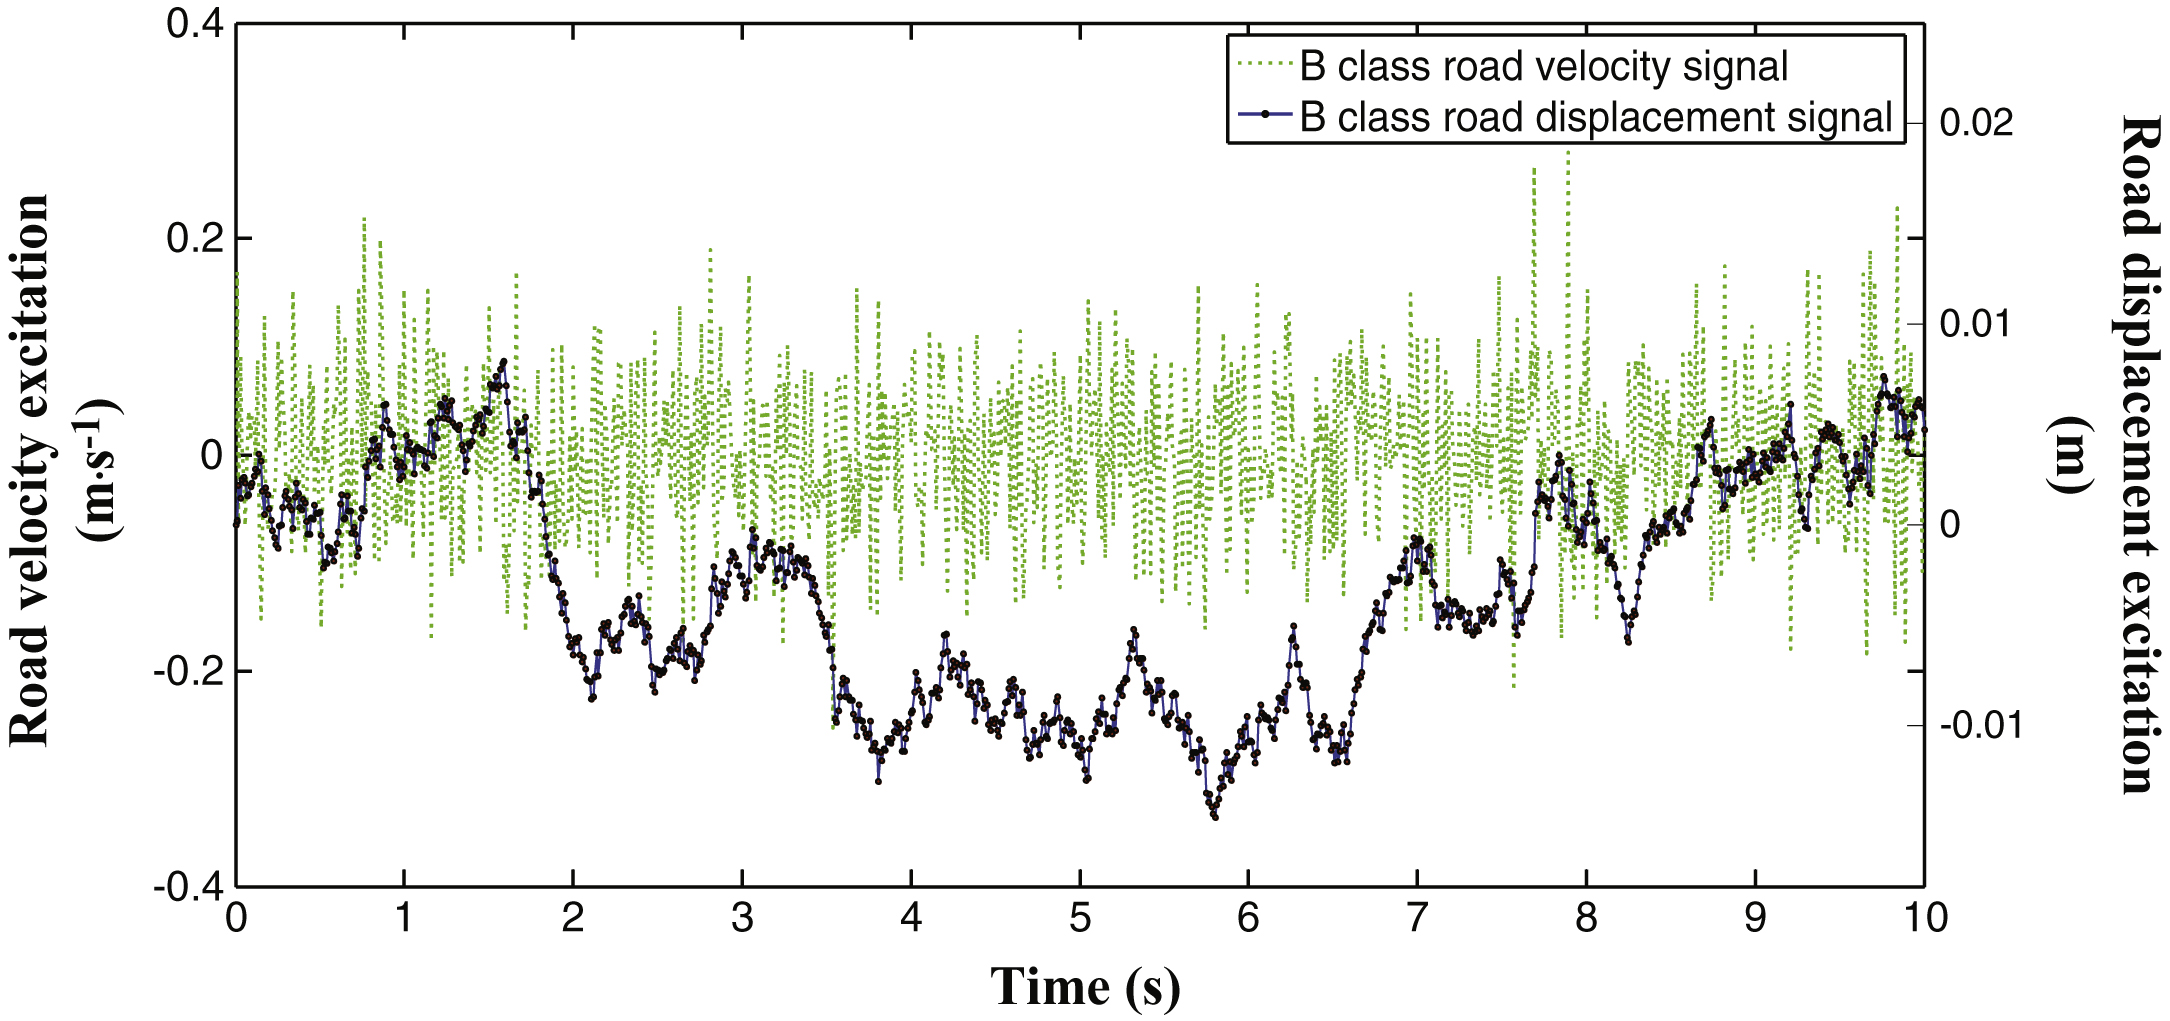 The road excitation used for simulation.